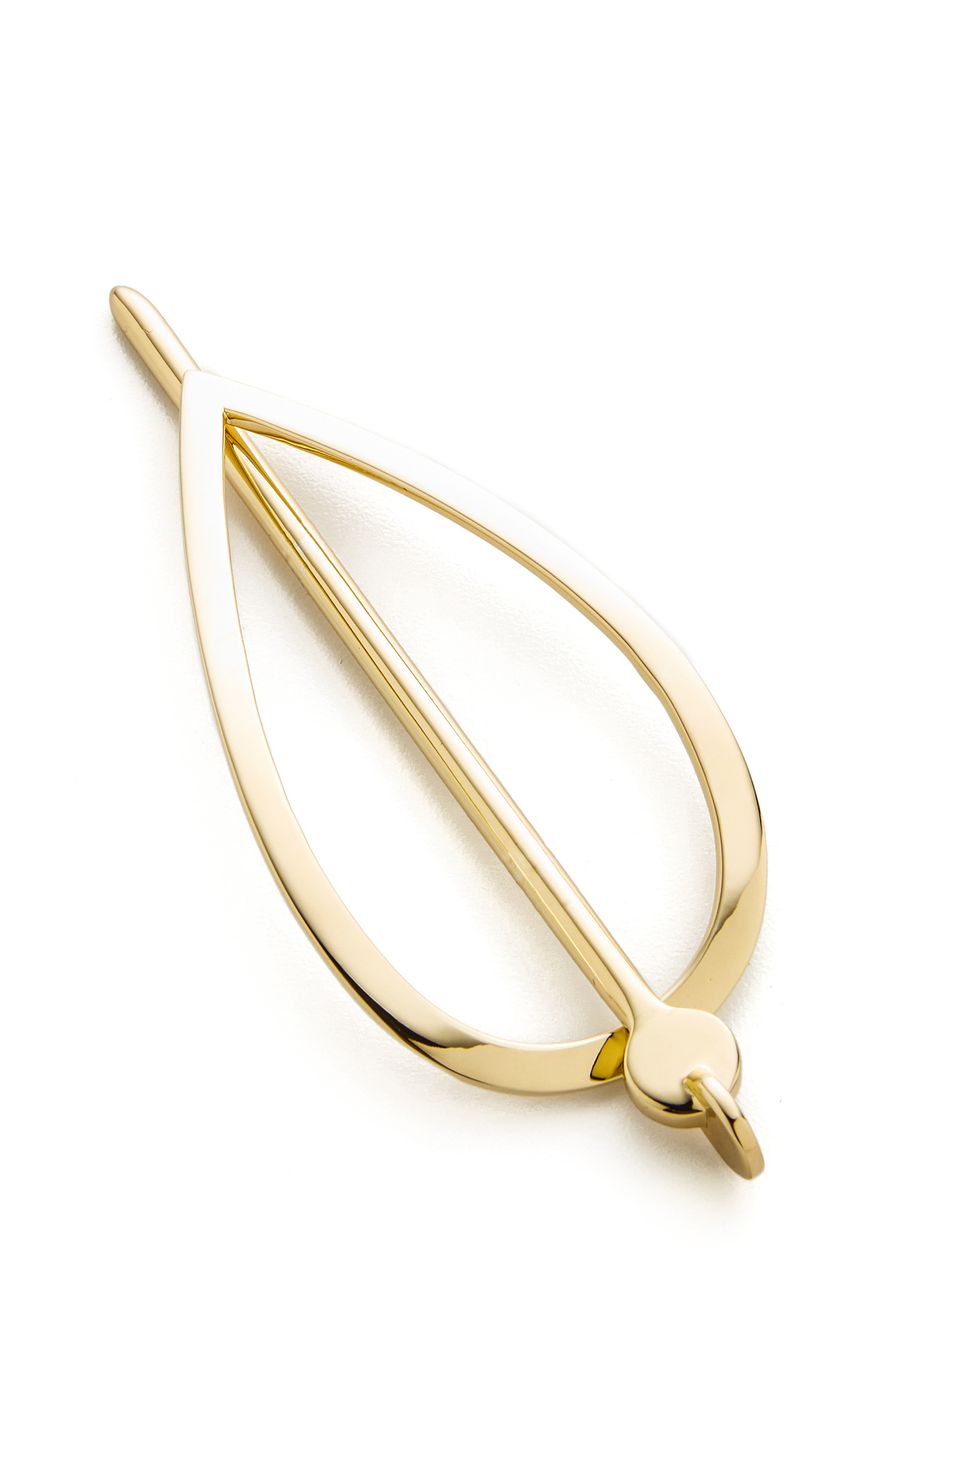 <p>Keep stray strands out of your eyes in order to really focus on the vino at hand.</p><p><em data-redactor-tag="em" data-verified="redactor">Elizabeth and James Hair Pin, $150; </em><a href="https://www.shopbop.com/mitchell-hairpin-elizabeth-james/vp/v=1/1574503977.htm?folderID=13575&amp;fm=other-shopbysize-viewall&amp;os=false&amp;colorId=11739" target="_blank" data-tracking-id="recirc-text-link"><em data-redactor-tag="em" data-verified="redactor">shopbop.com</em></a></p>